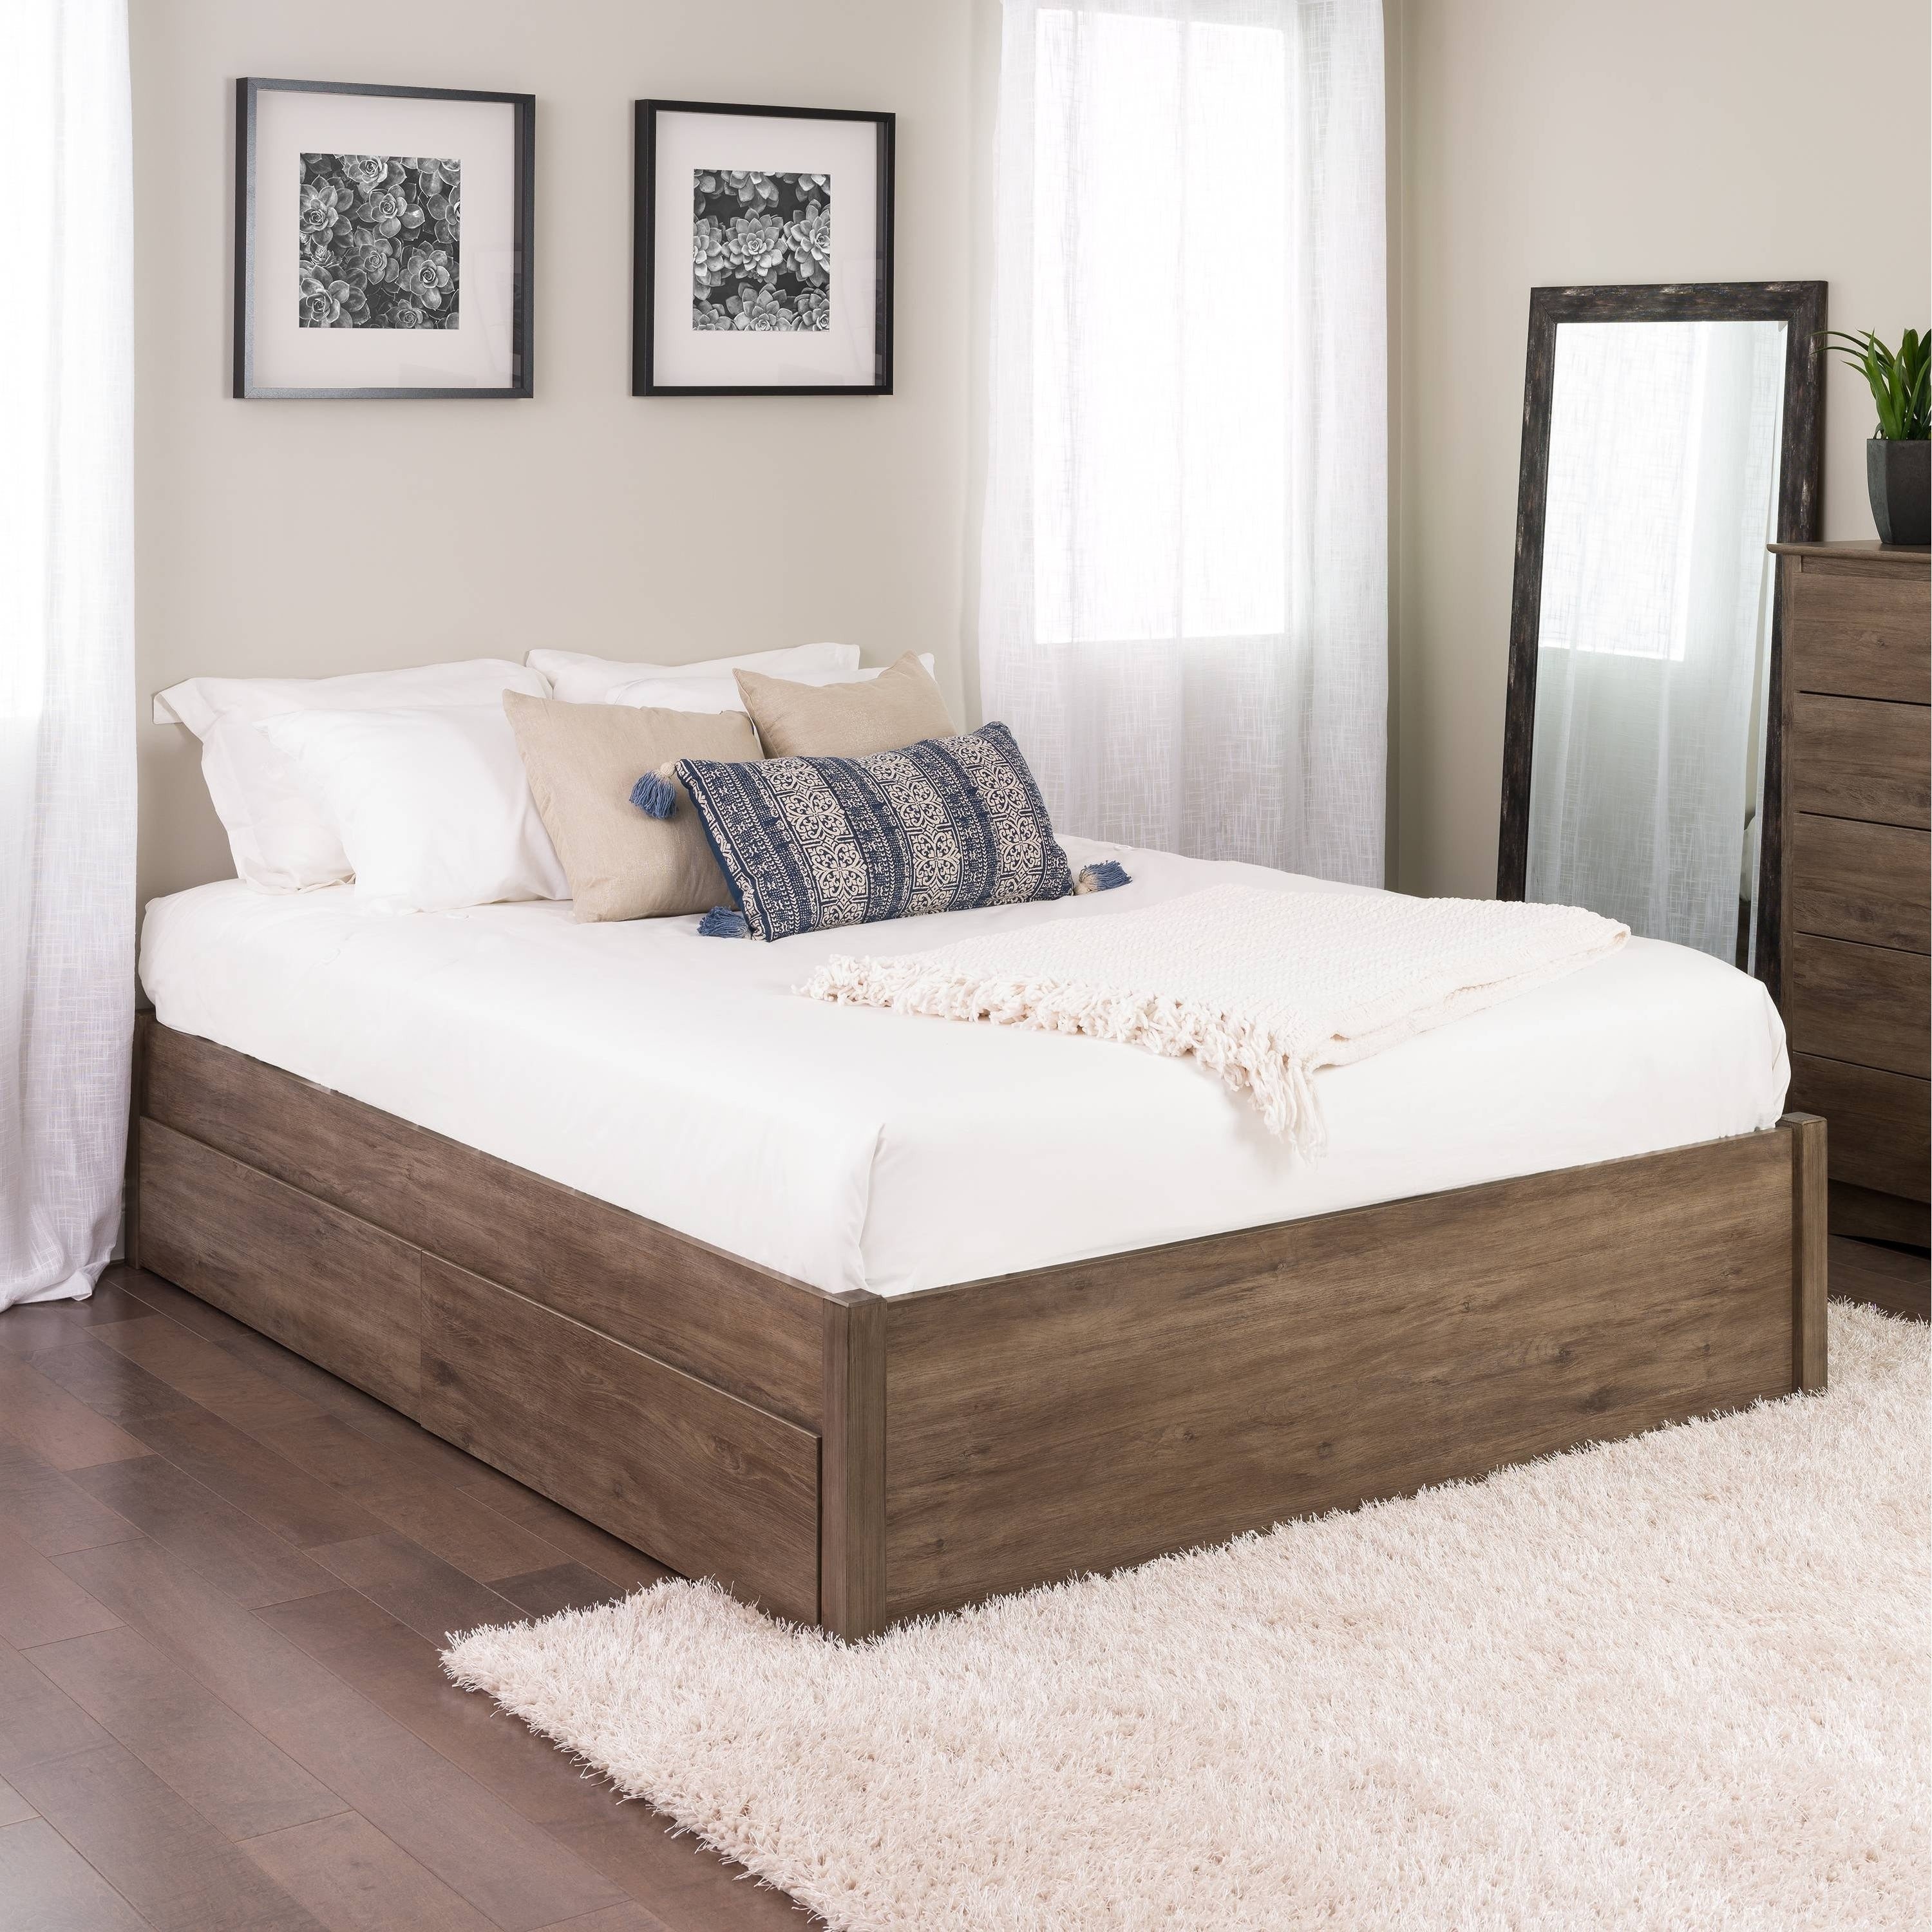 Ashley White Bedroom Furniture Best Of Prepac Queen Select 4 Post Platform Bed with Optional Drawers